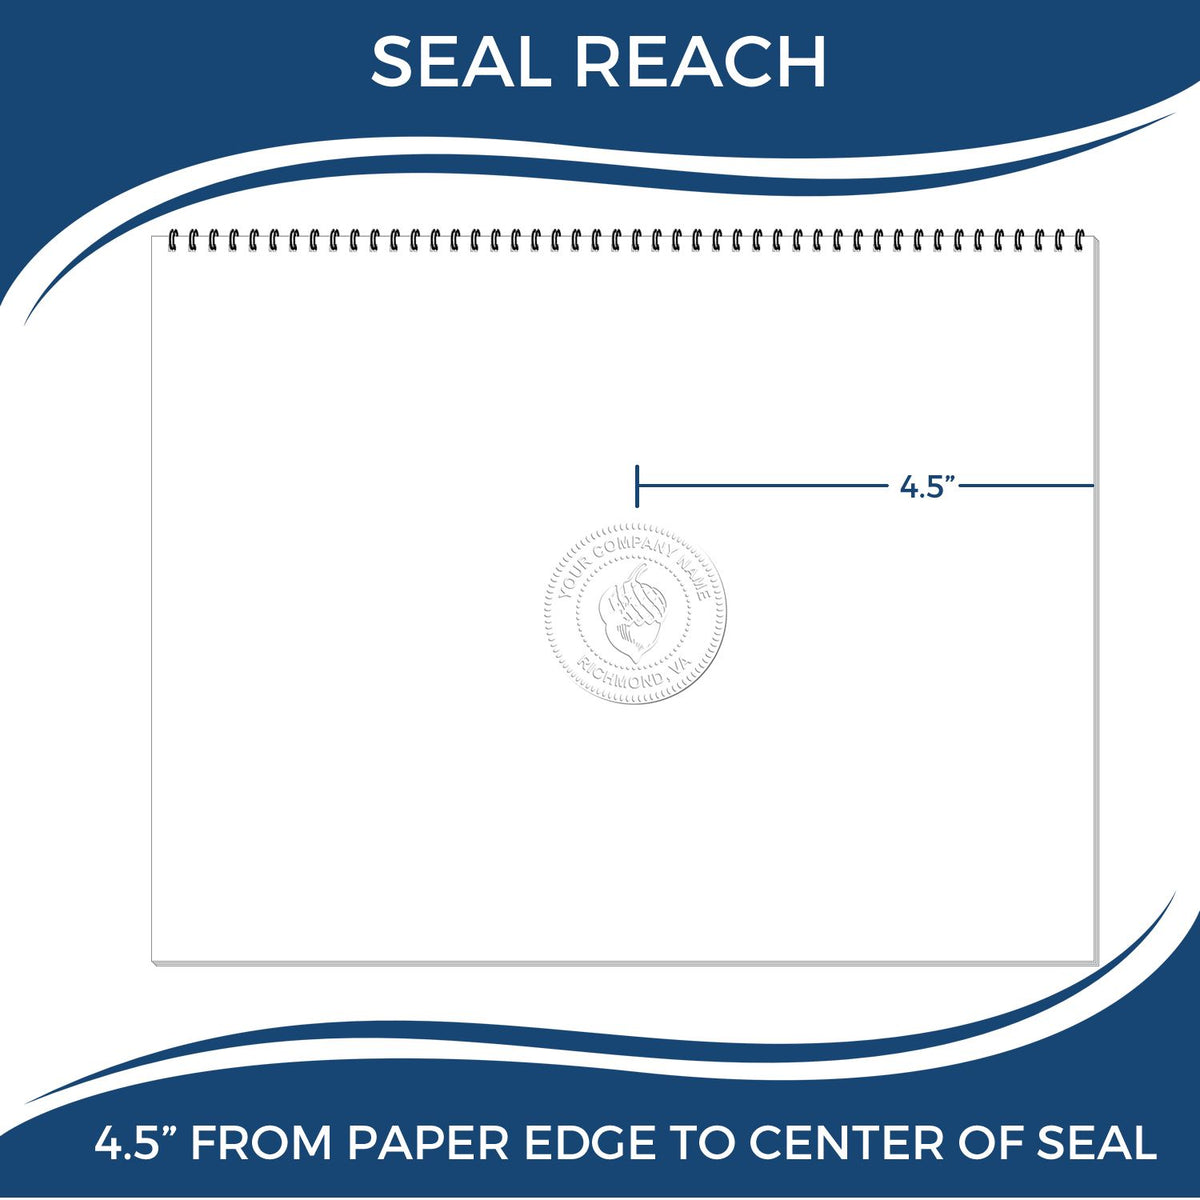 An infographic showing the seal reach which is represented by a ruler and a miniature seal image of the Extended Long Reach Alaska Surveyor Embosser